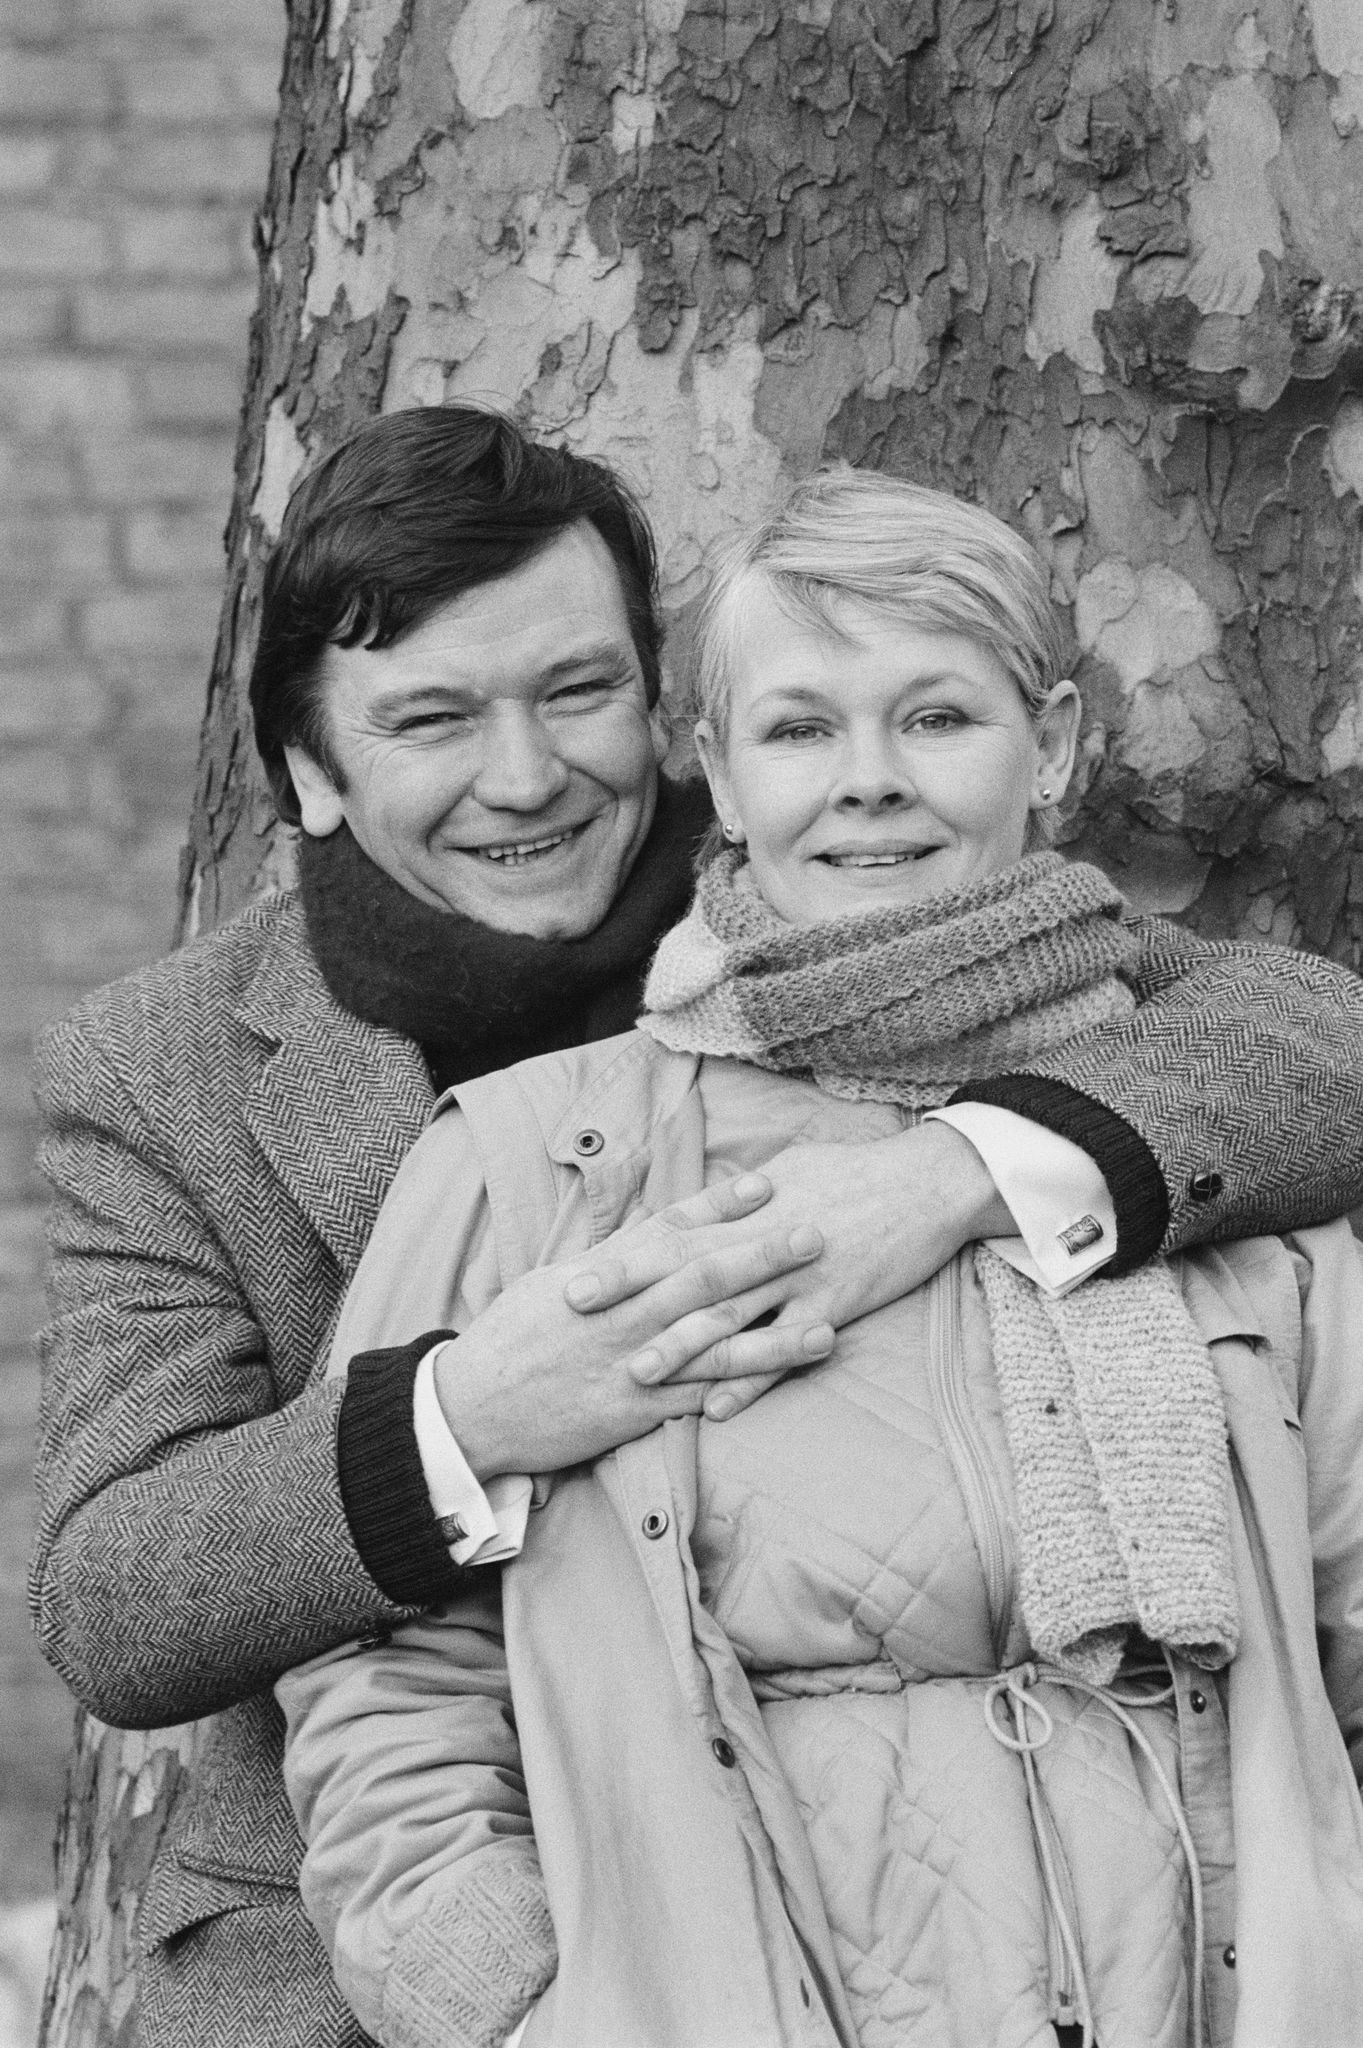 Judi Dench and Michael Williams in the television sitcom "A Fine Romance" in 1983 in London, England | Source: Getty Images